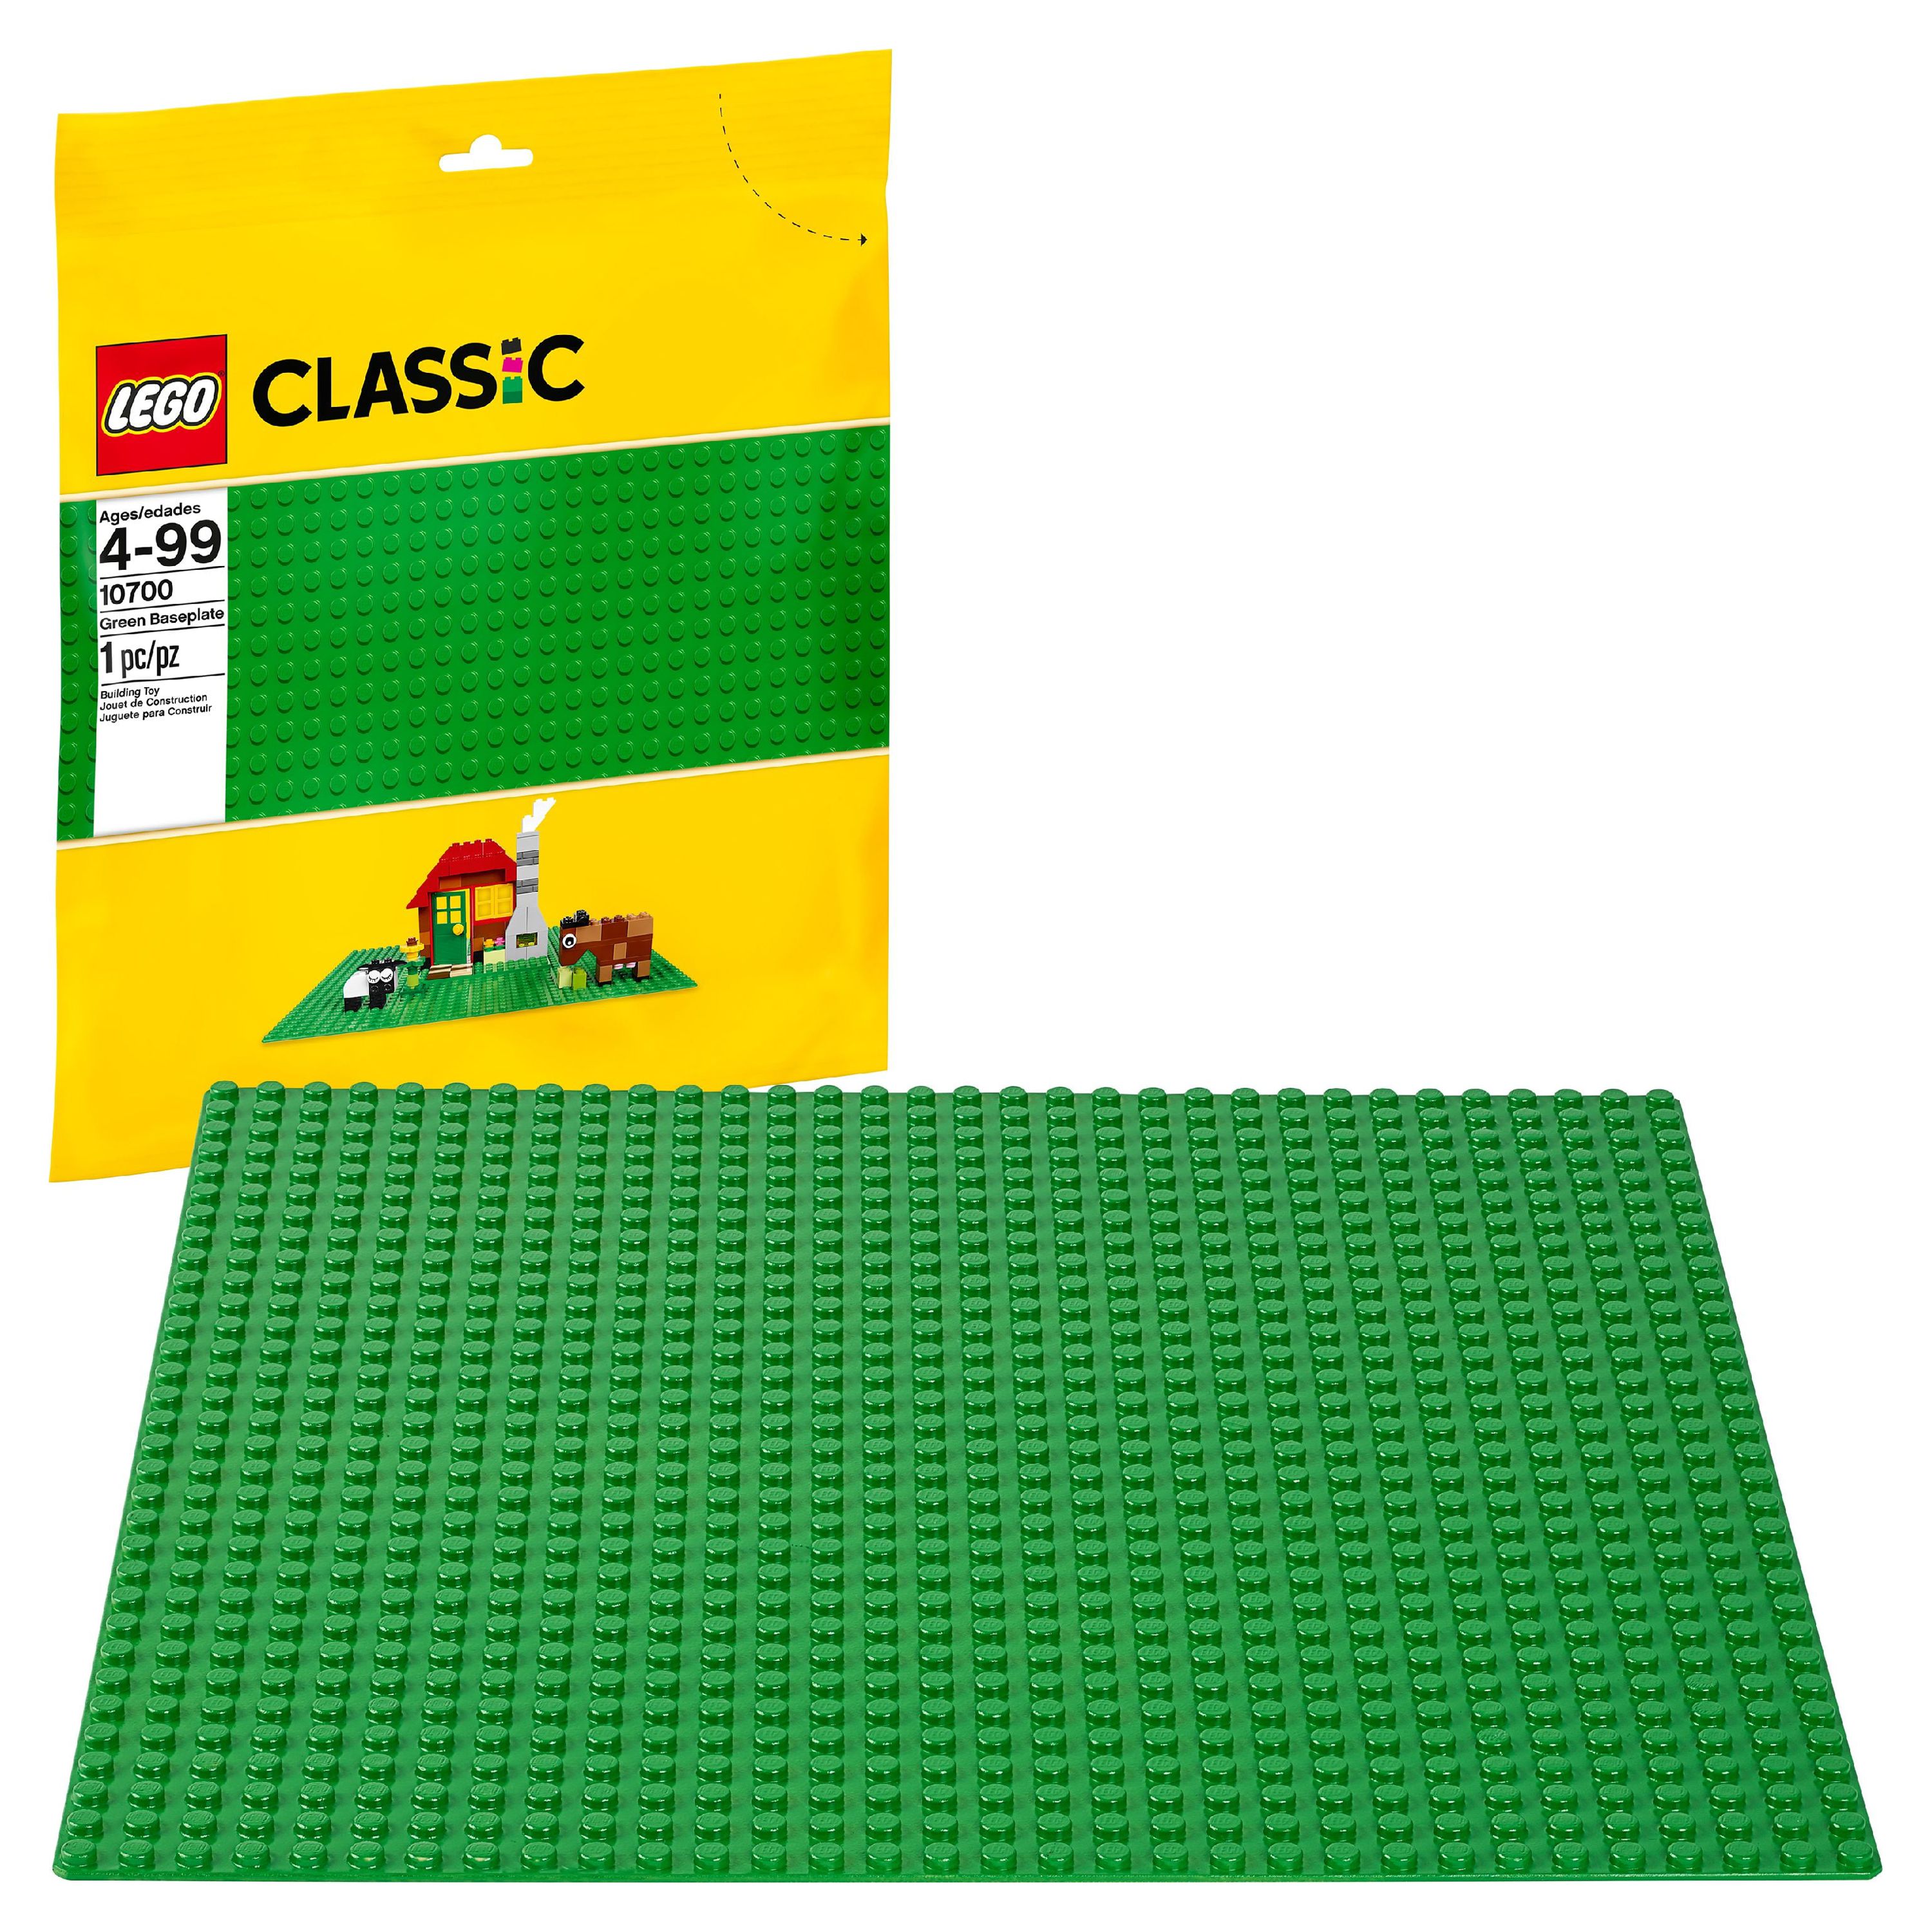 LEGO Classic Green Baseplate 10700 Building Accessory (1 Piece) - image 1 of 6